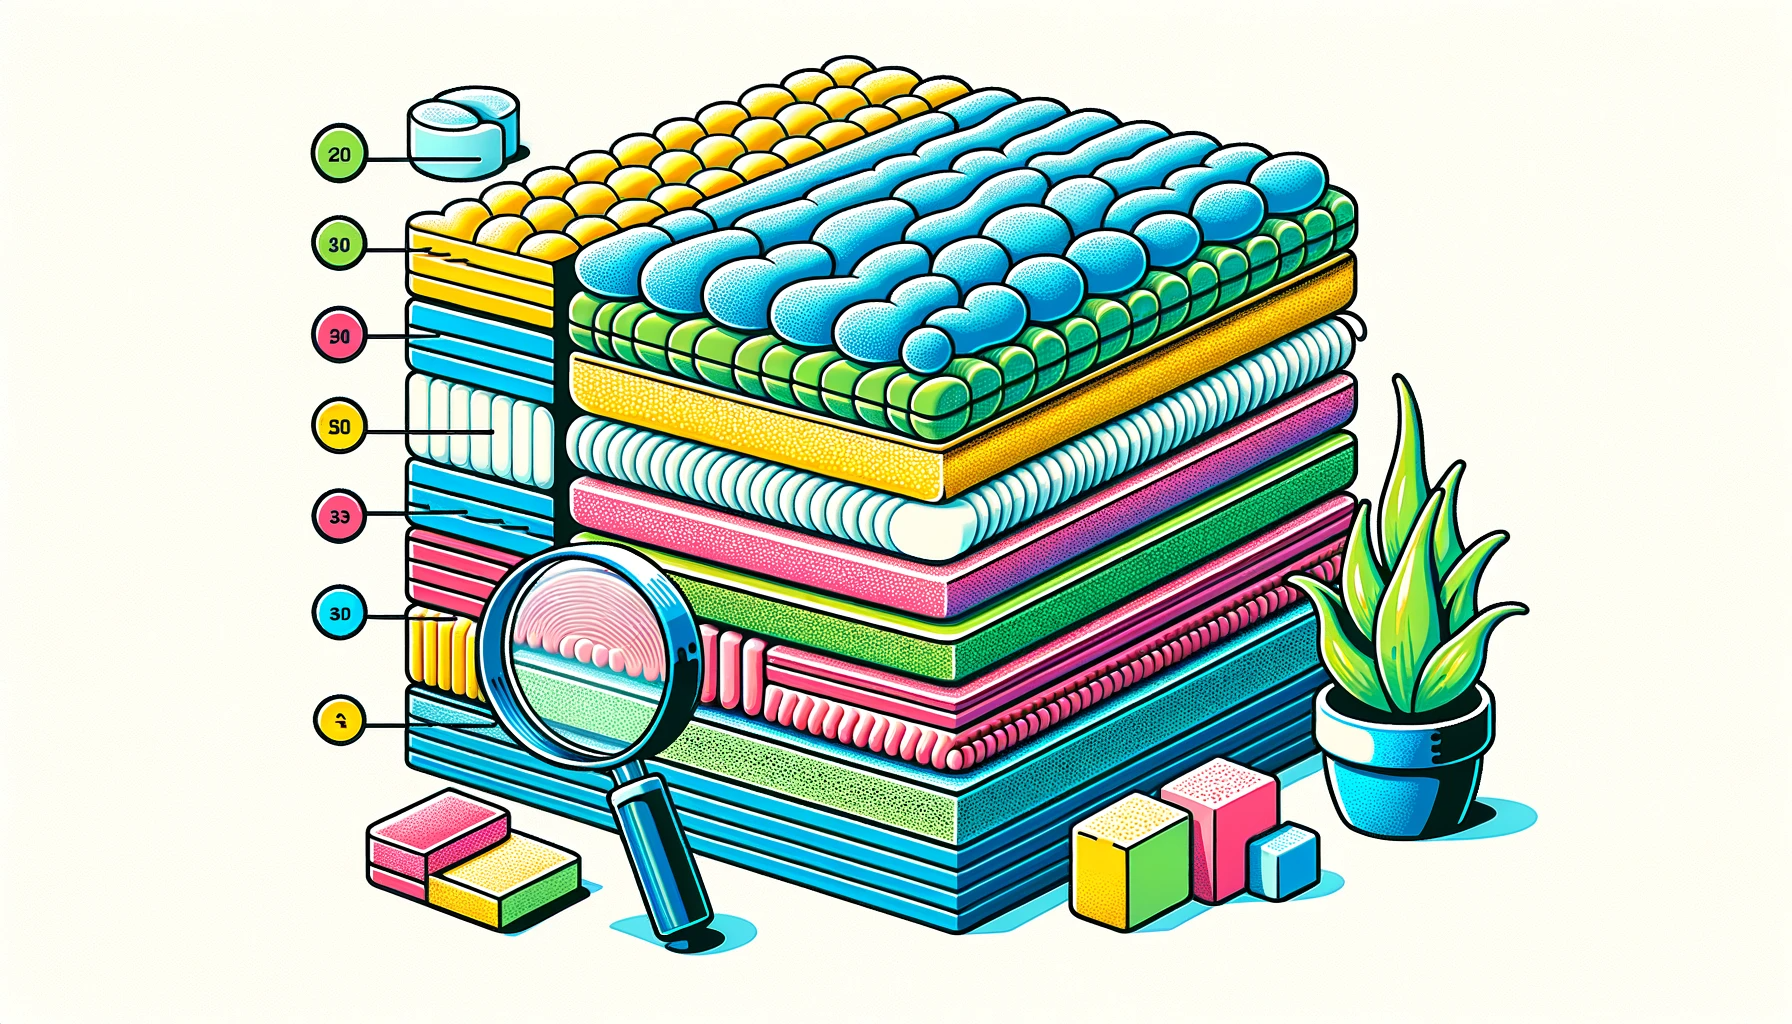 Colorful vector image illustrating various foam materials used in mattresses. The image showcases layers of foam, each distinctively colored and labeled, to represent different types. Beside the layers, there's a magnifying glass emphasizing the texture of the foam.